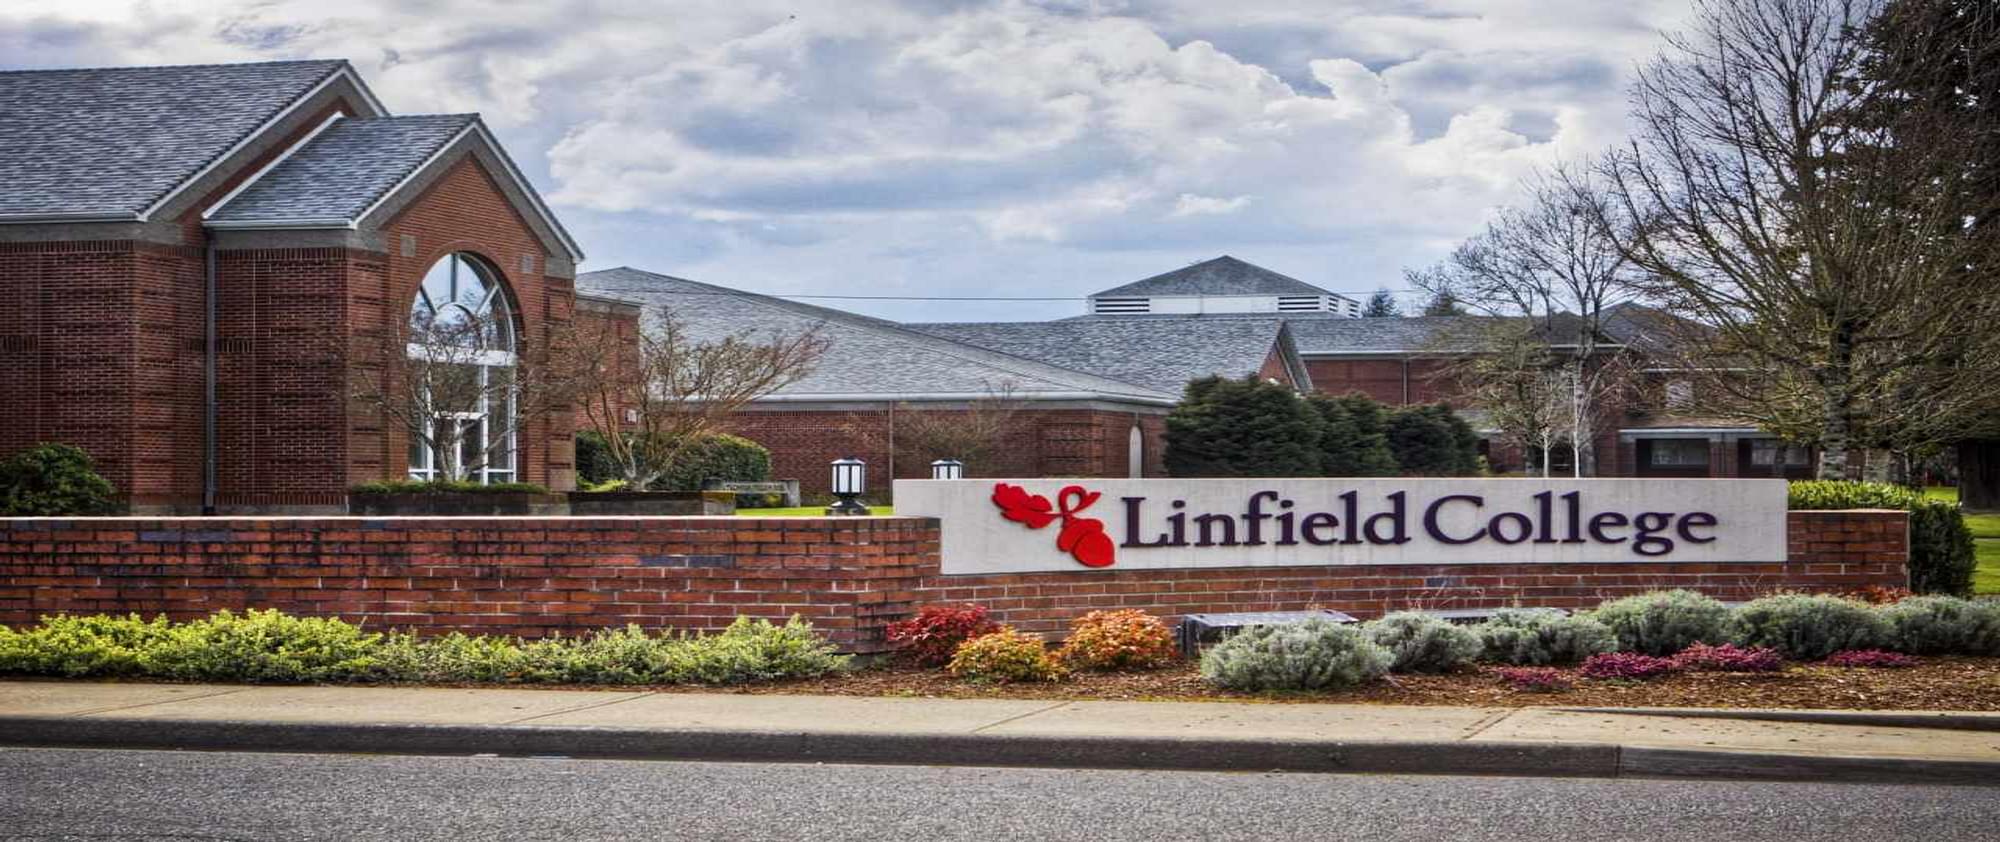 Linfield College, McMinnville Programs, Tuition Fees & Entry